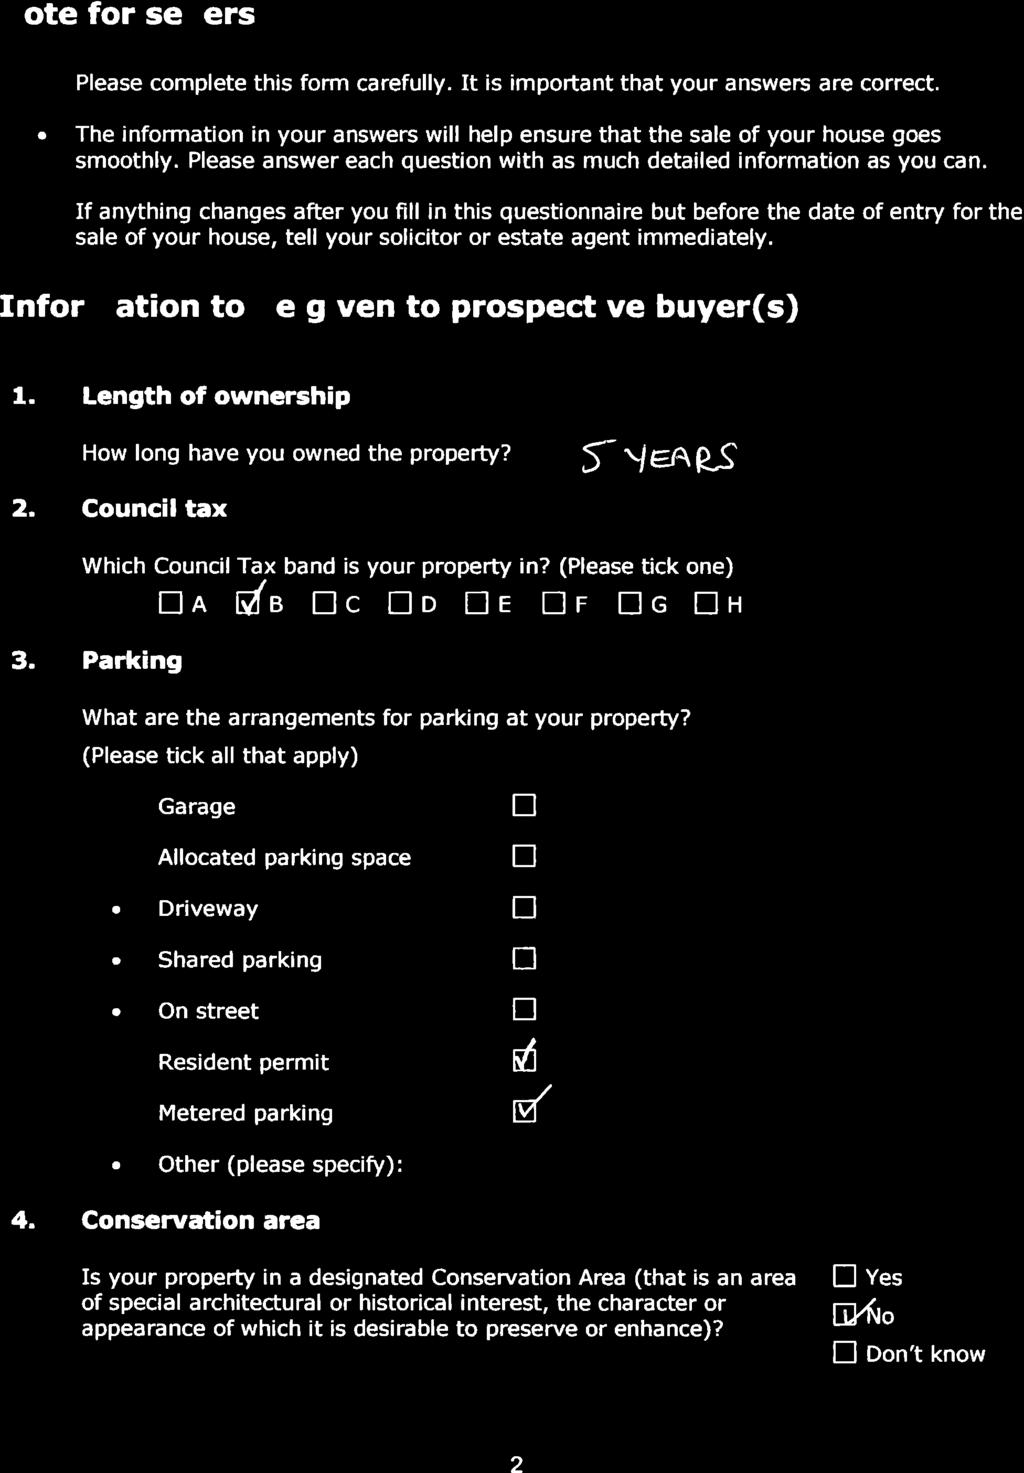 properly q uestion nai re Note for sellers a a a Please complete this form carefully. It is important that your answers are correct.